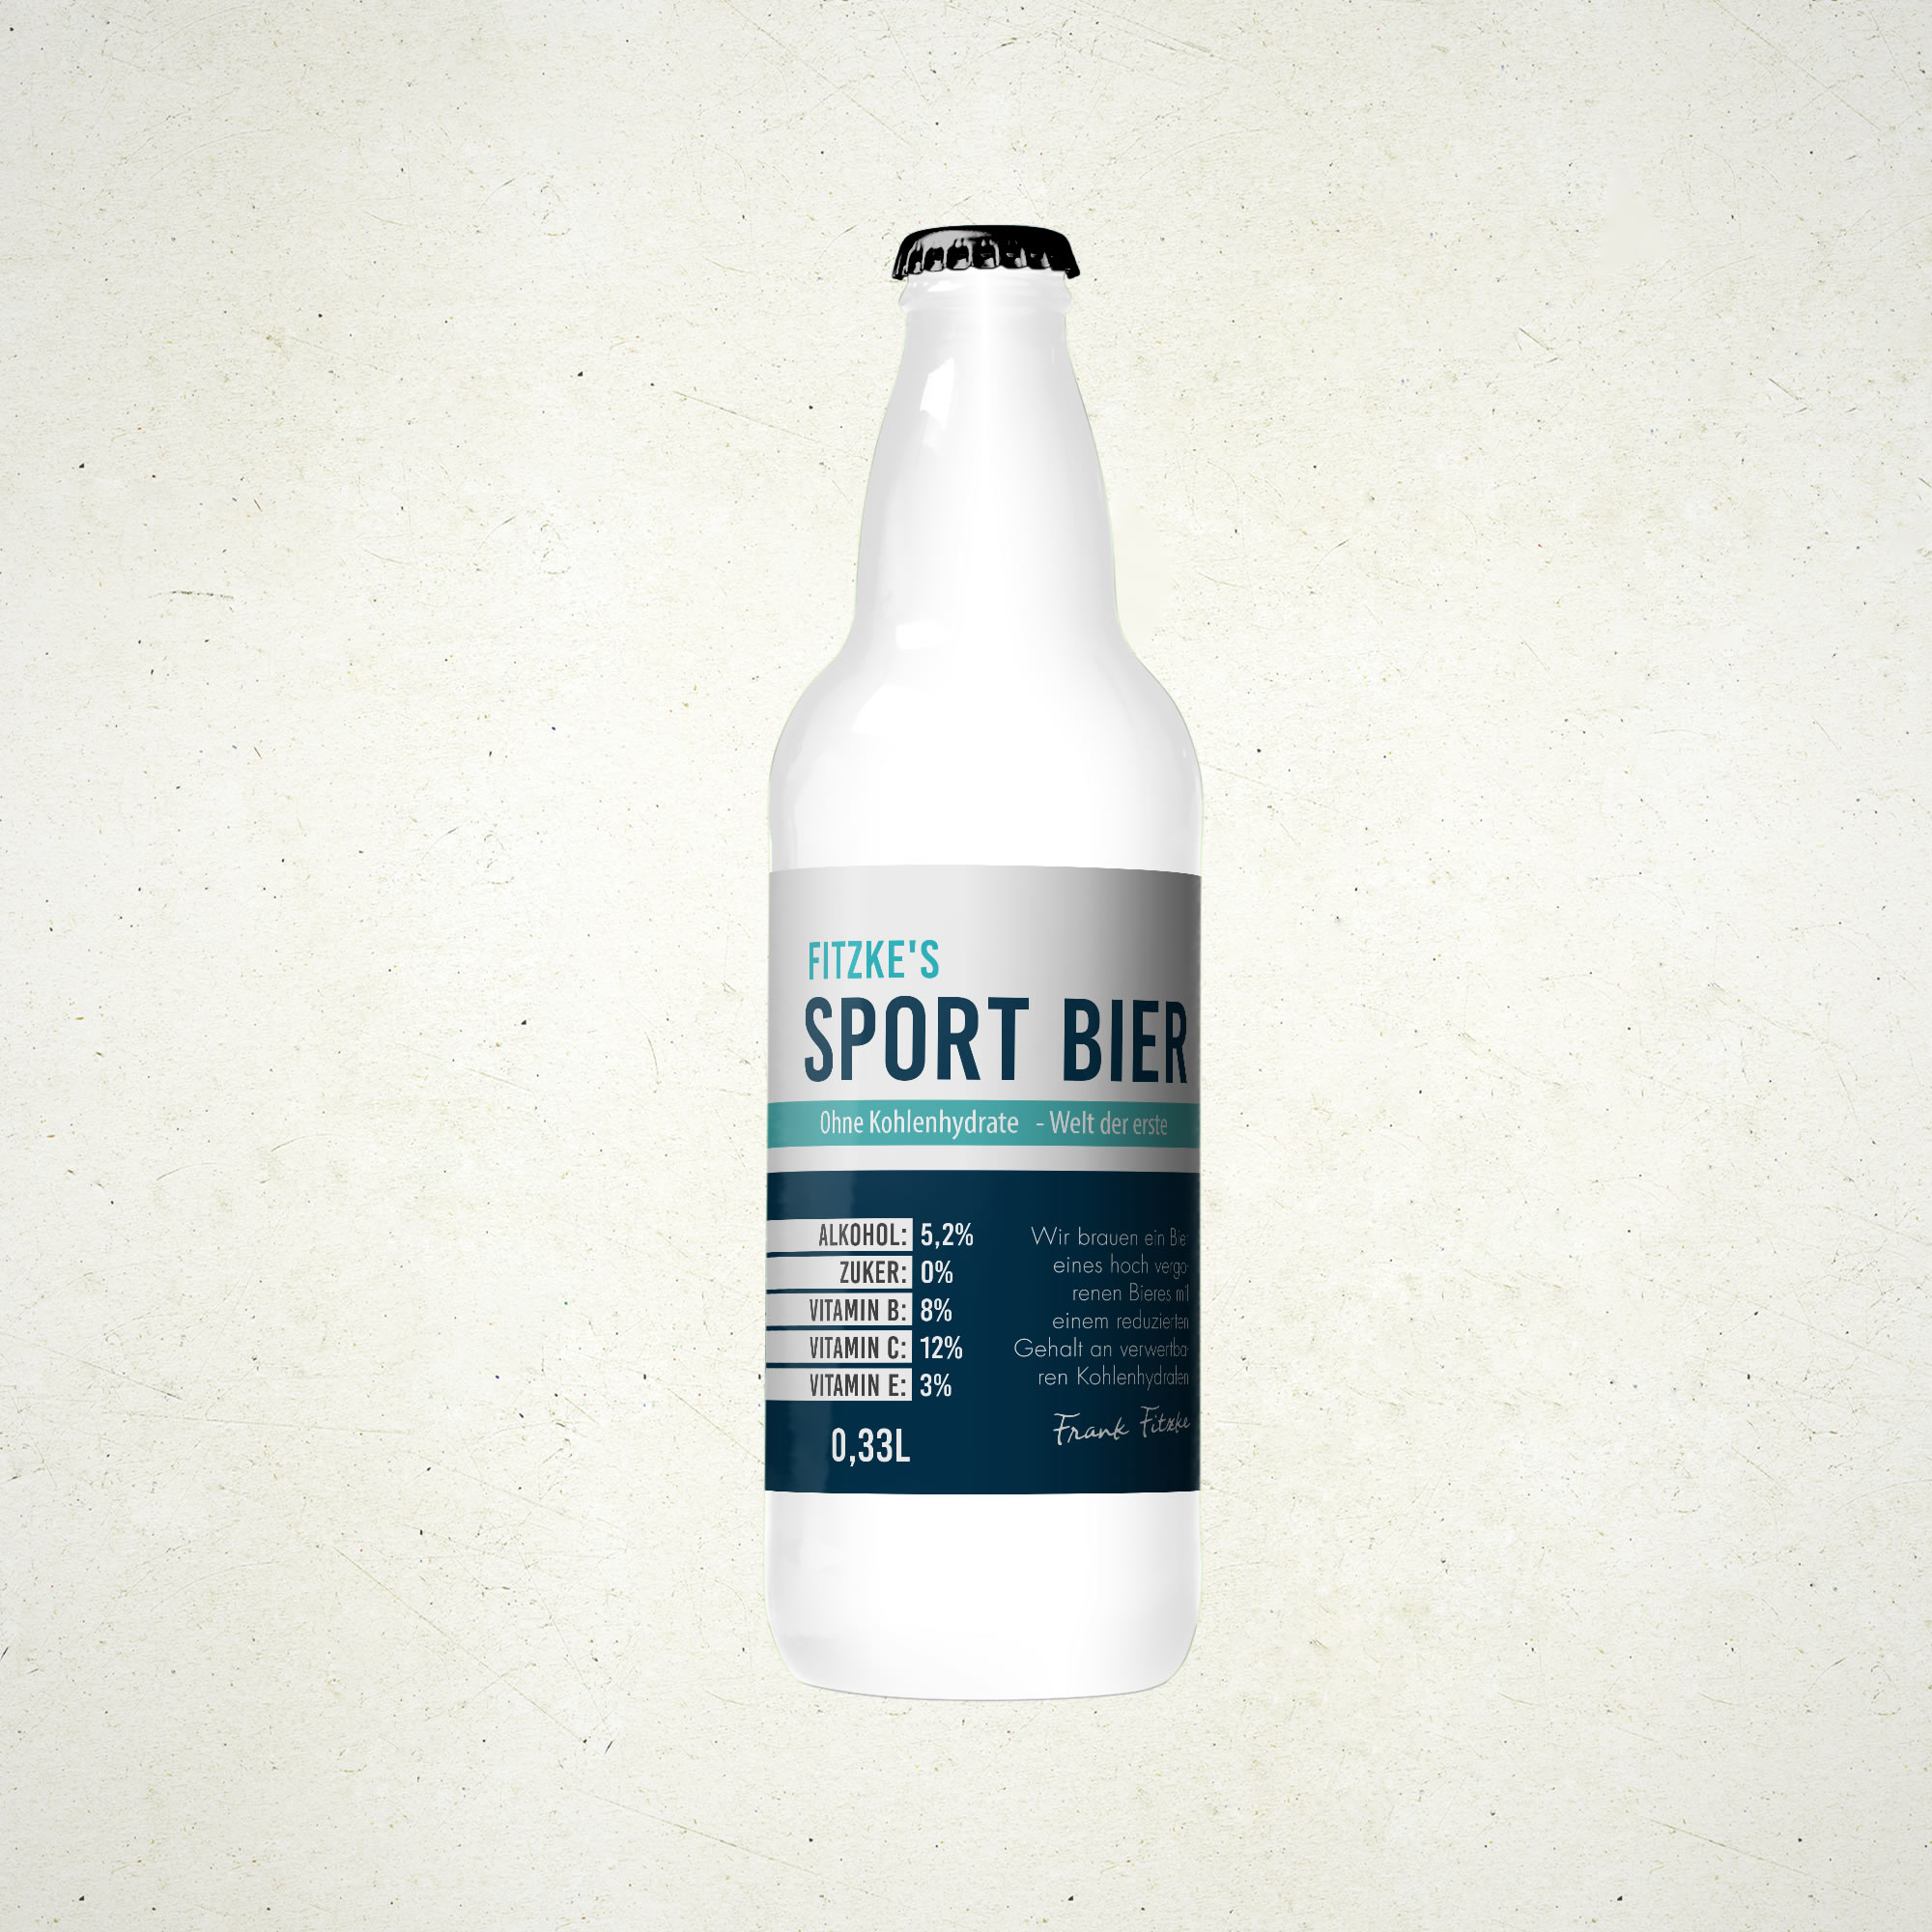 Bottle label design by cynemes for Fitzke’s Sport Bier